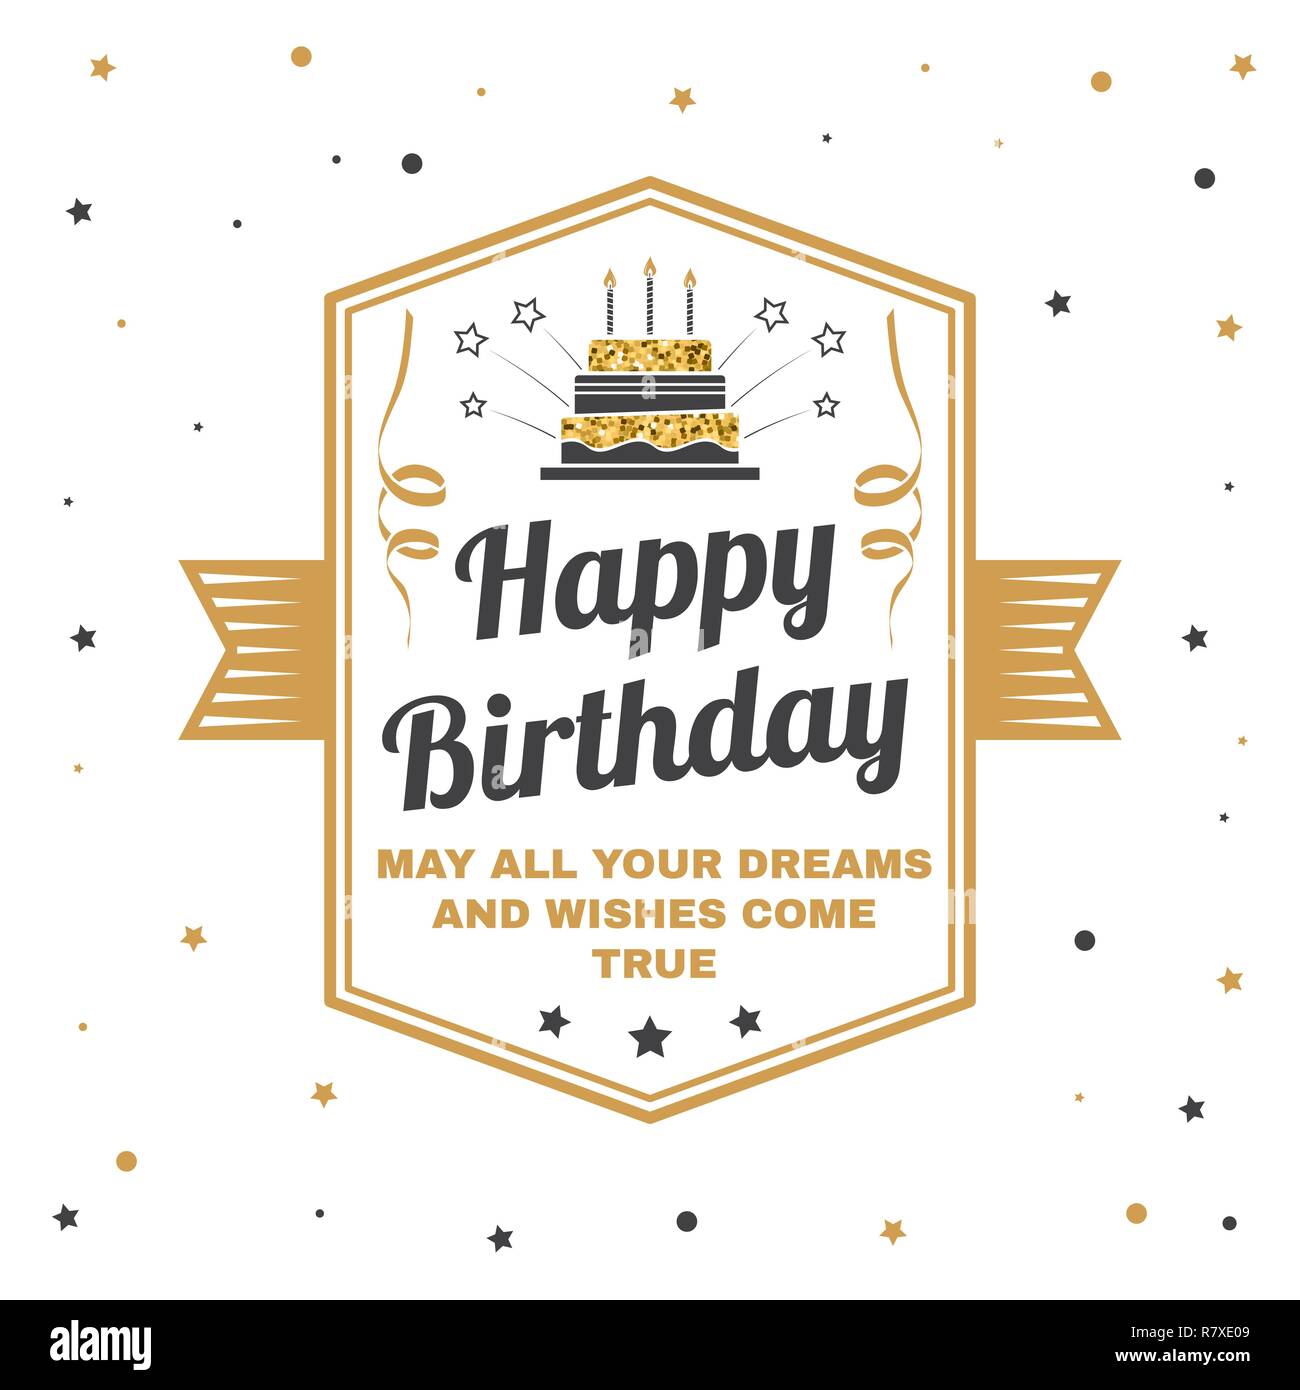 Happy Birthday to you. May all your dreams and wishes come true. Stamp, badge, card with birthday cake with candles and serpentine. Vector. Design for birthday celebration emblem in retro style Stock Vector